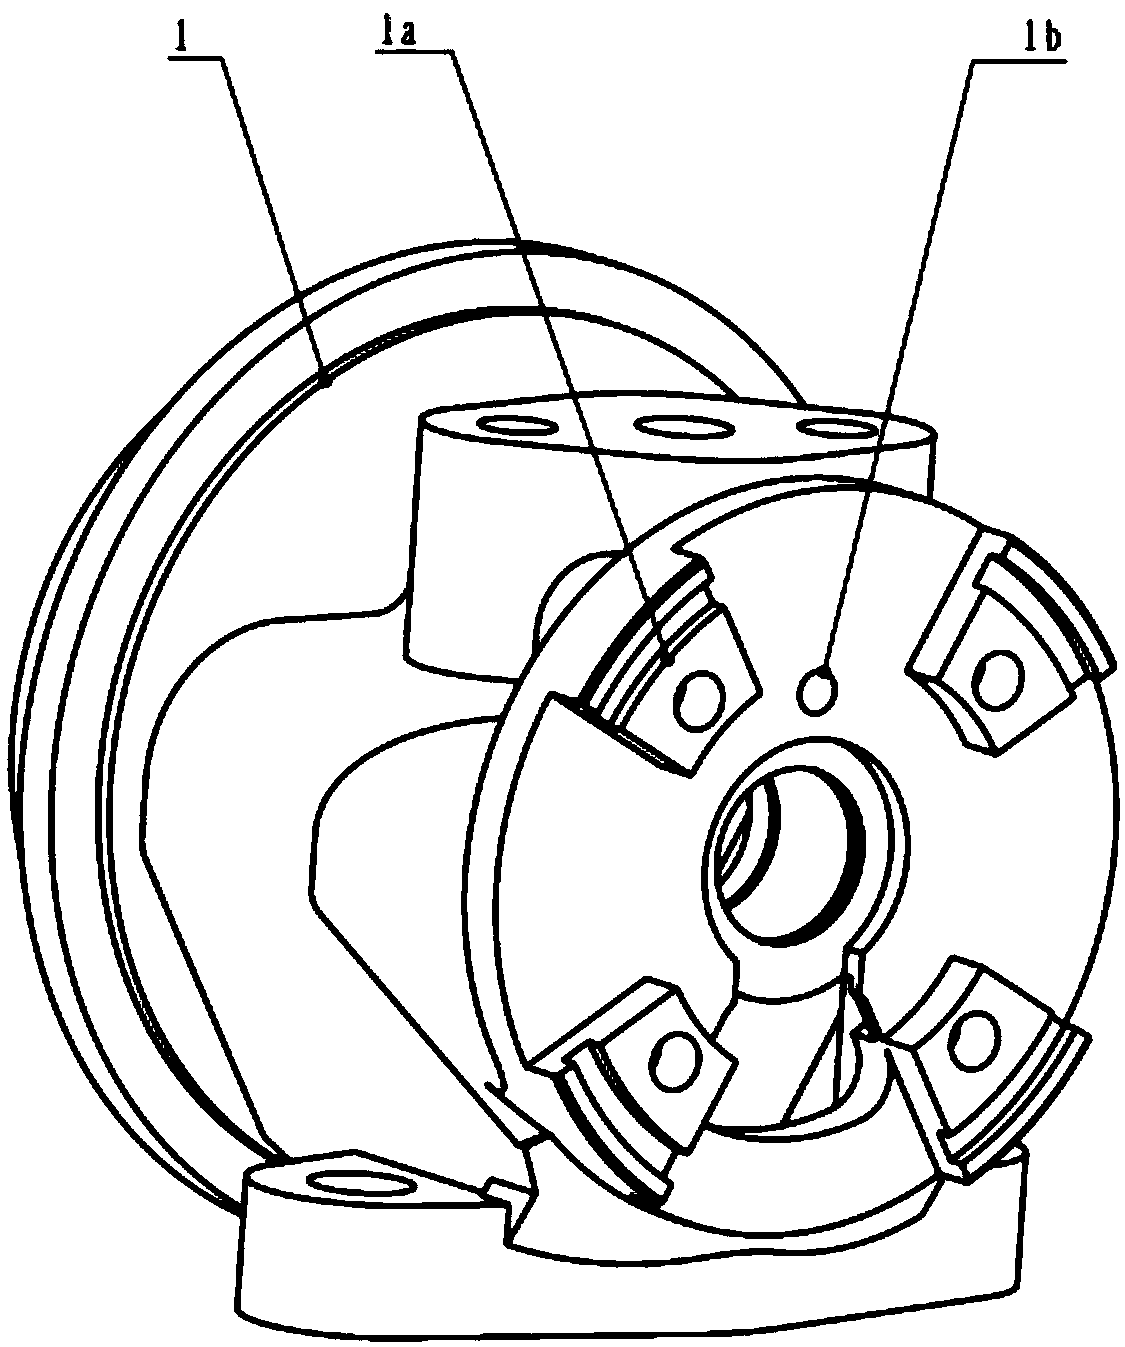 Structure for testing axial force of turbocharger